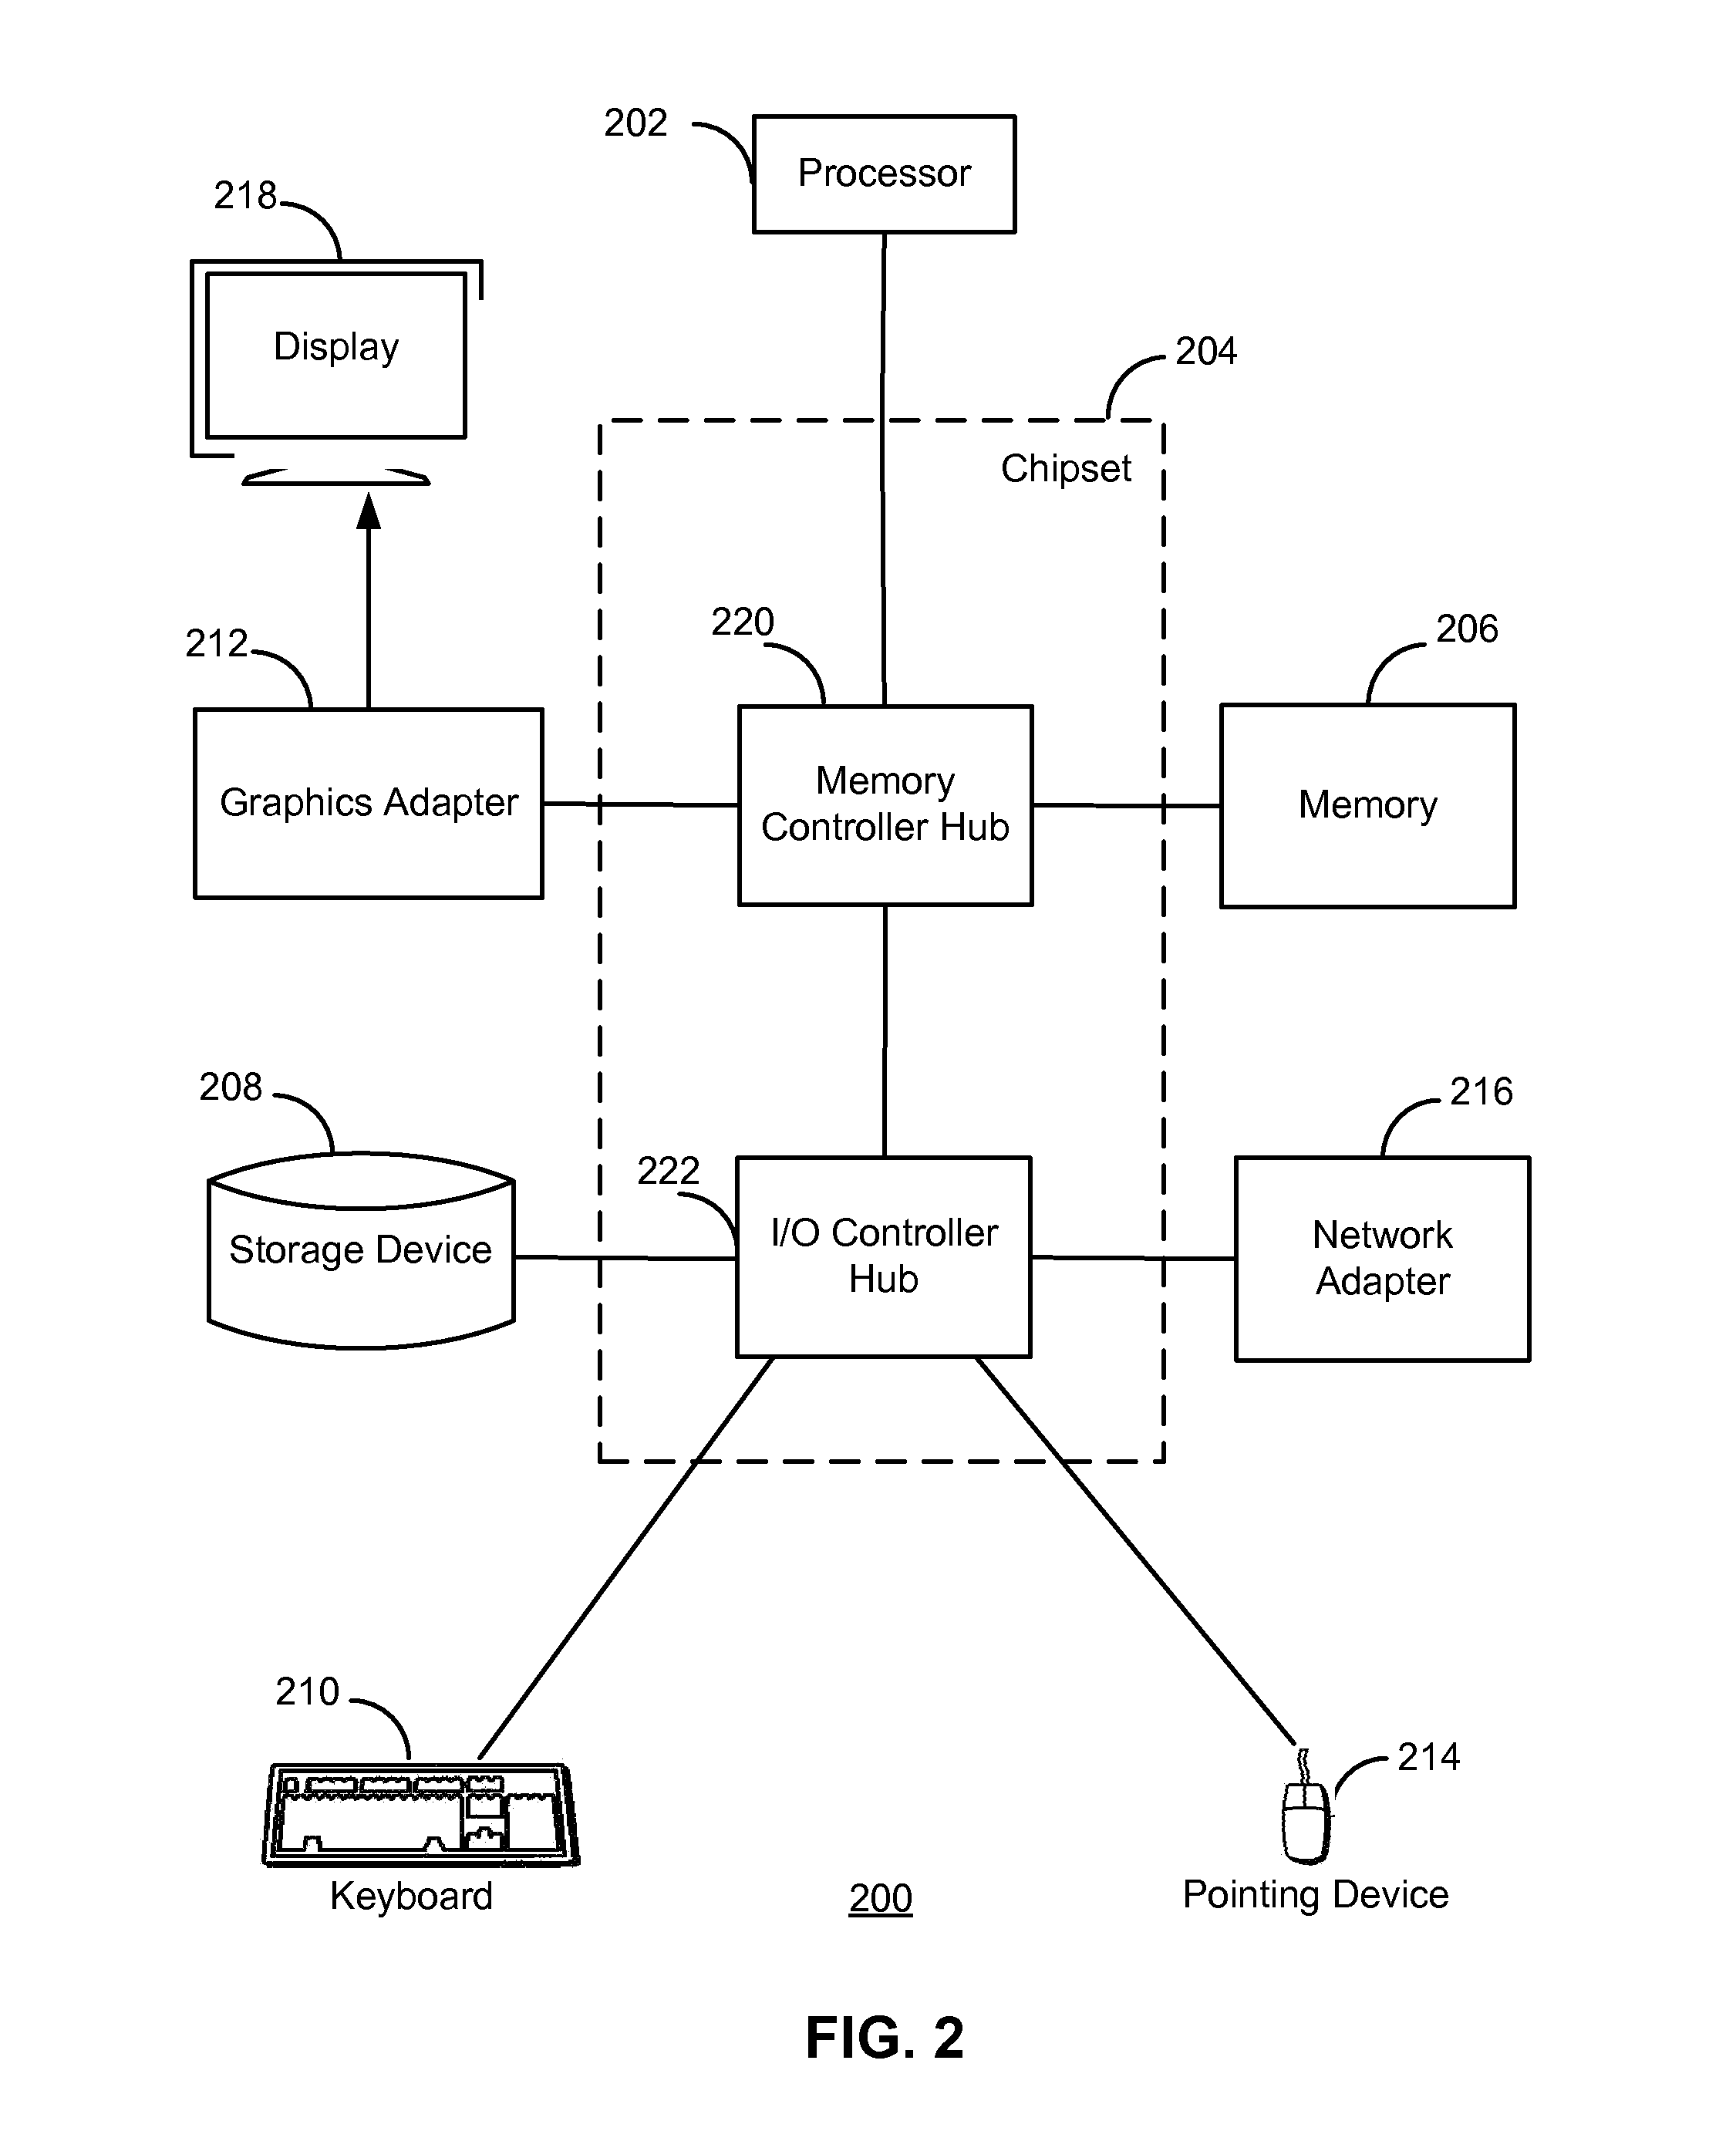 End-to-end policy enforcement in the presence of a traffic midpoint device